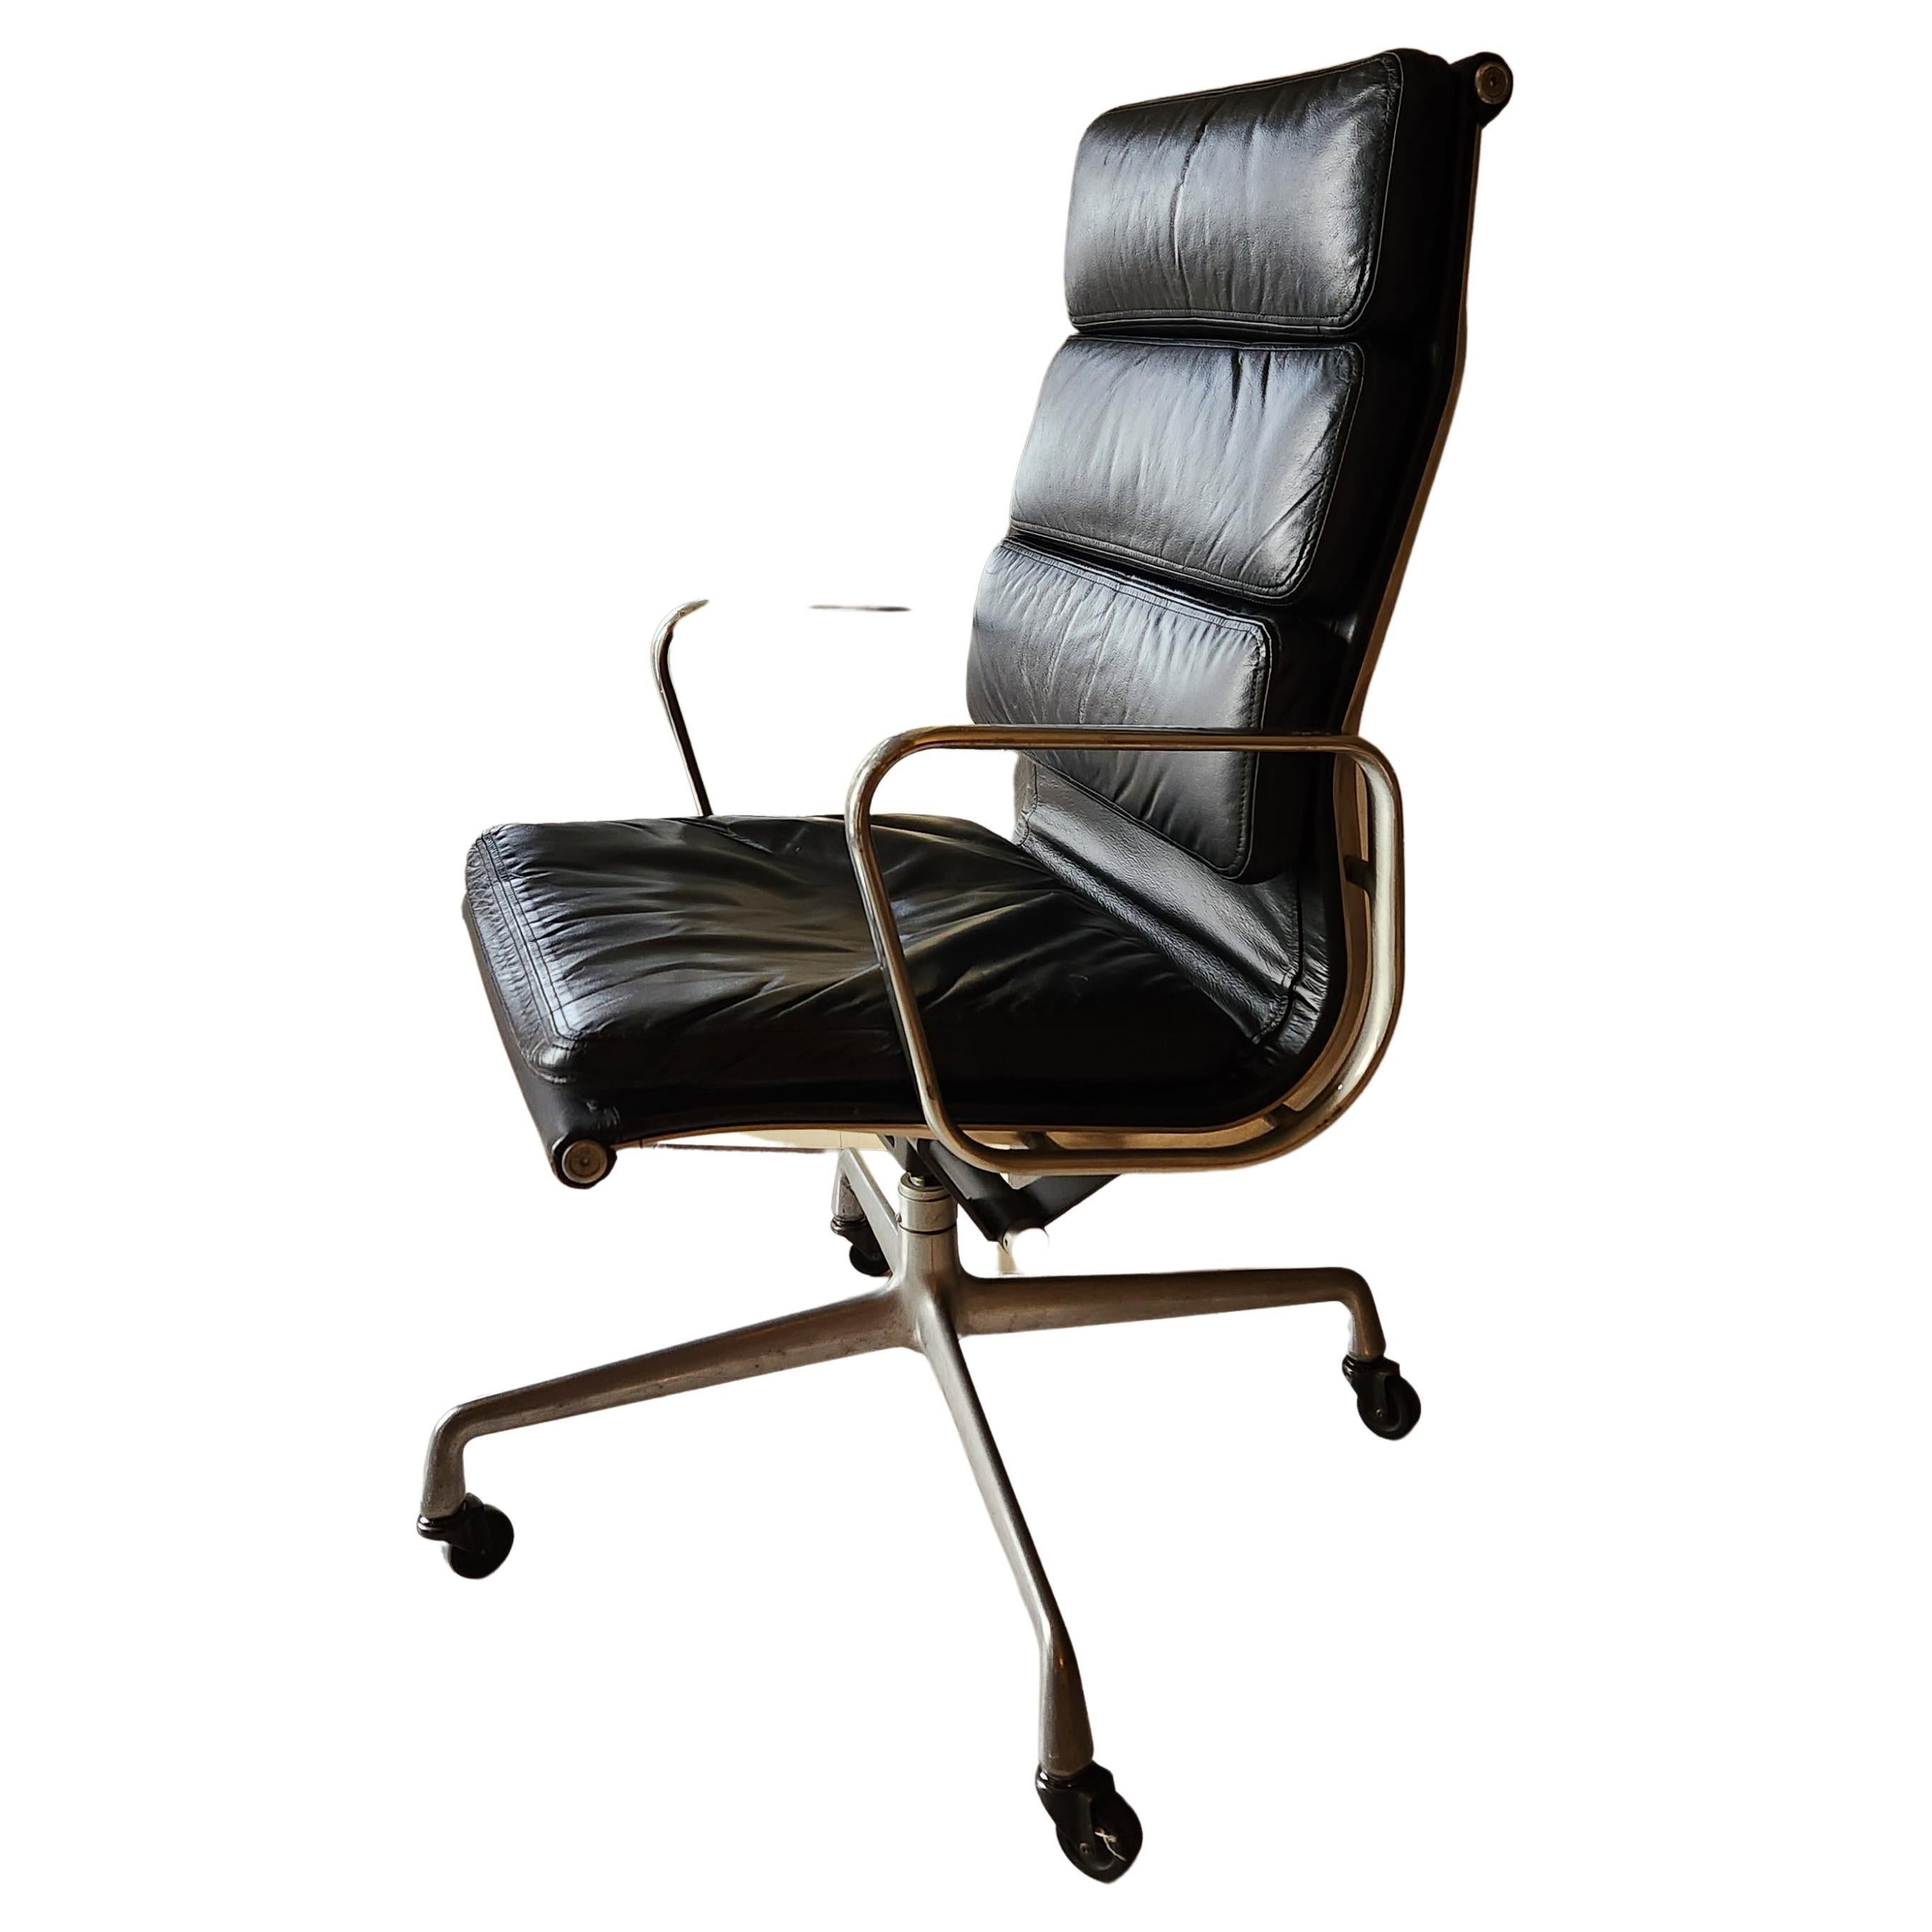 1978 Original Herman Miller Eames soft pad Aluminum Group executive chair in black leather 
Eames classic soft pad chair black leather and canvas by Charles and Ray Eames designed 1969.
Superior comfort 
Chair retained from Vidal Sassoon Salon in